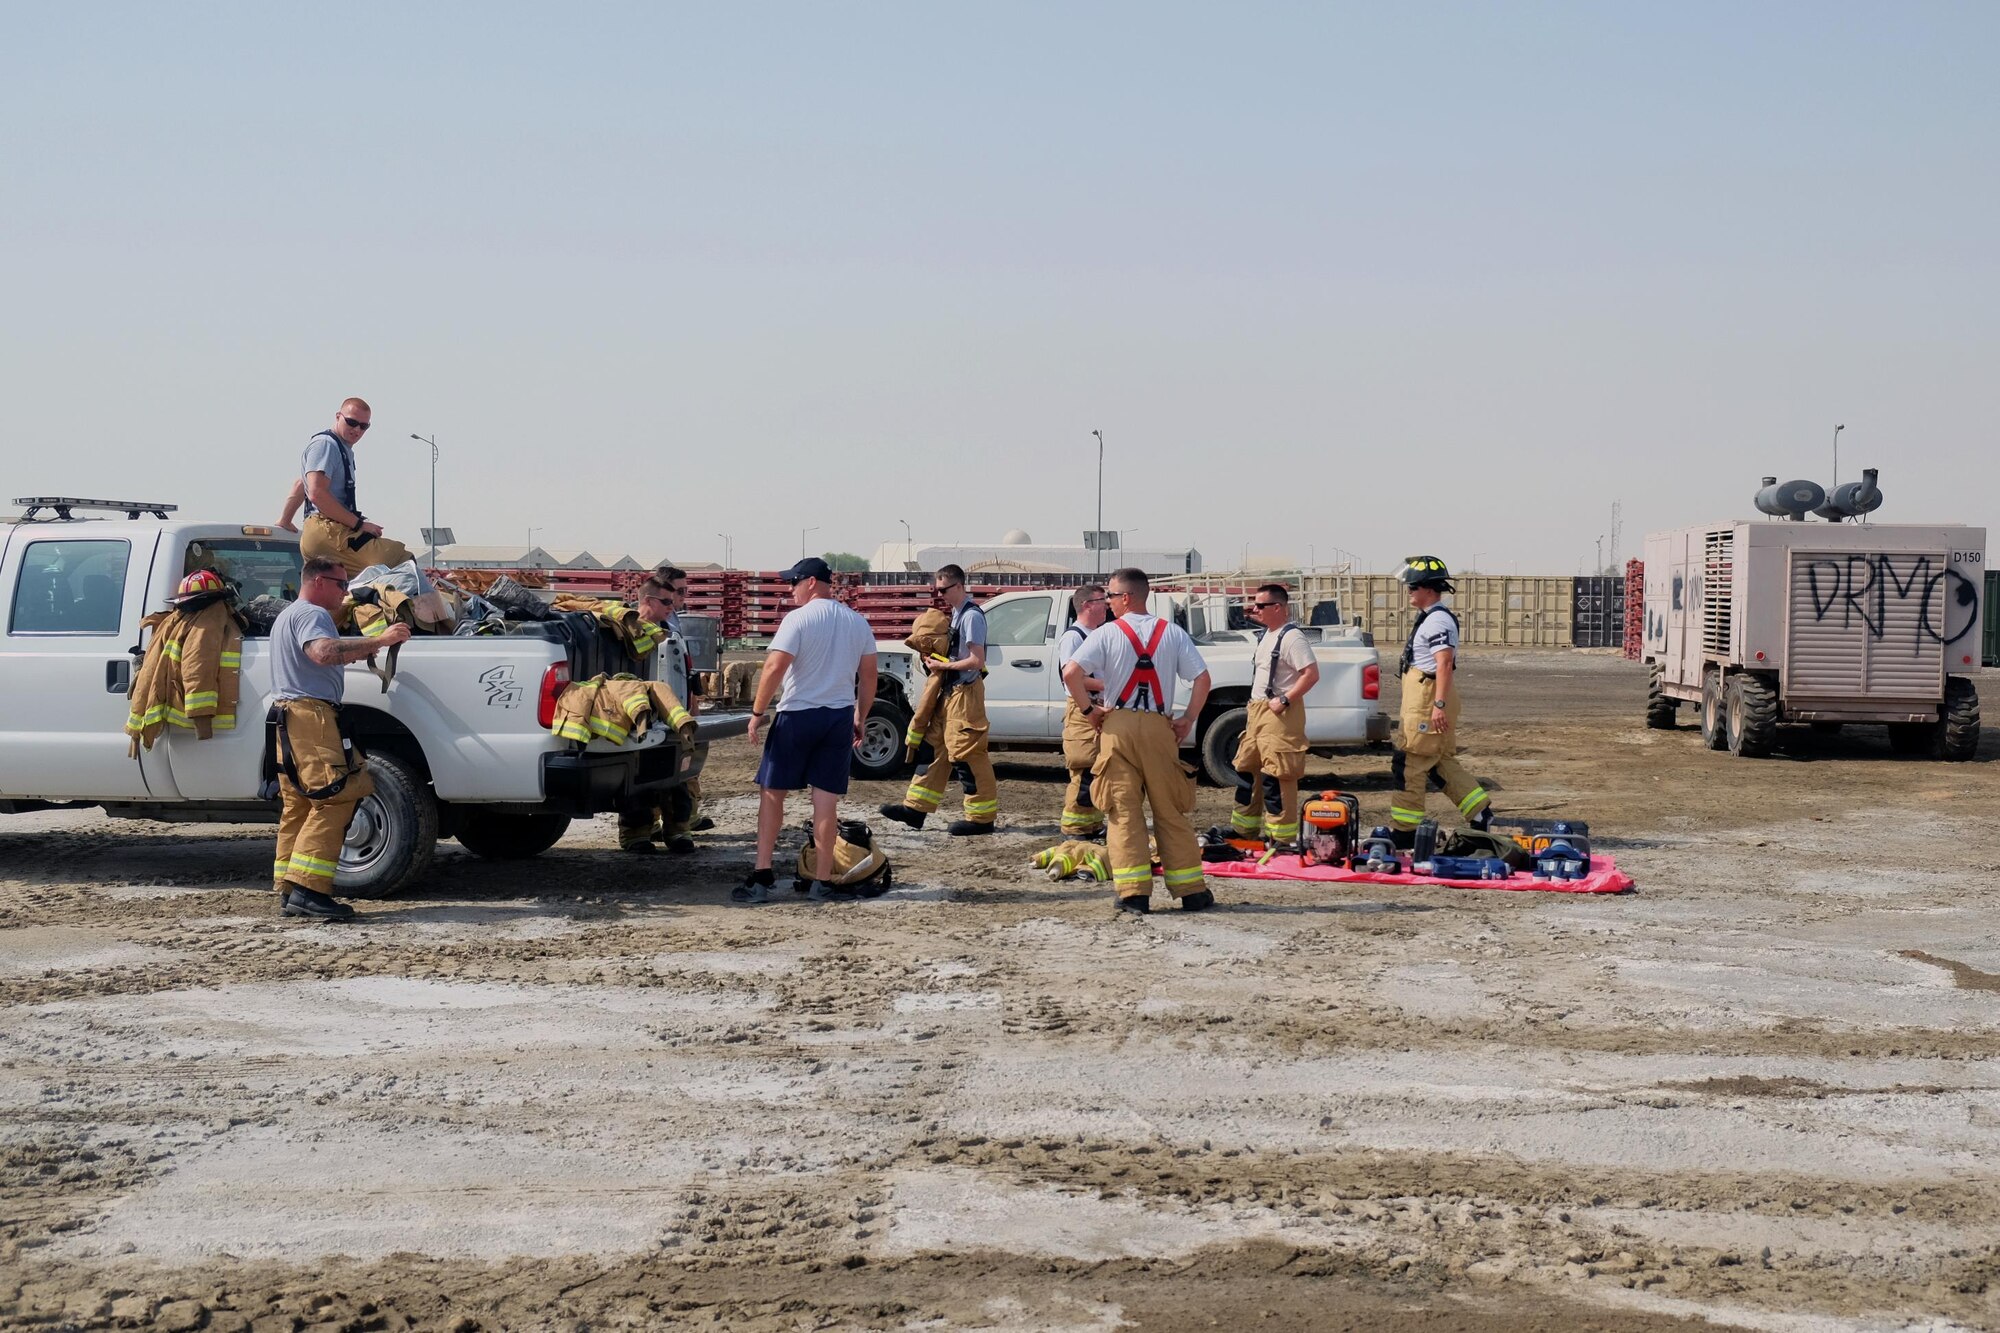 Airmen with the 380th Expeditionary Civil Engineer Squadron Fire Department prepare for vehicle extrication training June 23, 2017, at an undisclosed location in southwest Asia. Training entailed partially dismantling a non-functioning vehicle to gain unimpeded access to the passenger compartment. (U.S. Air Force photo by Senior Airman Preston Webb)